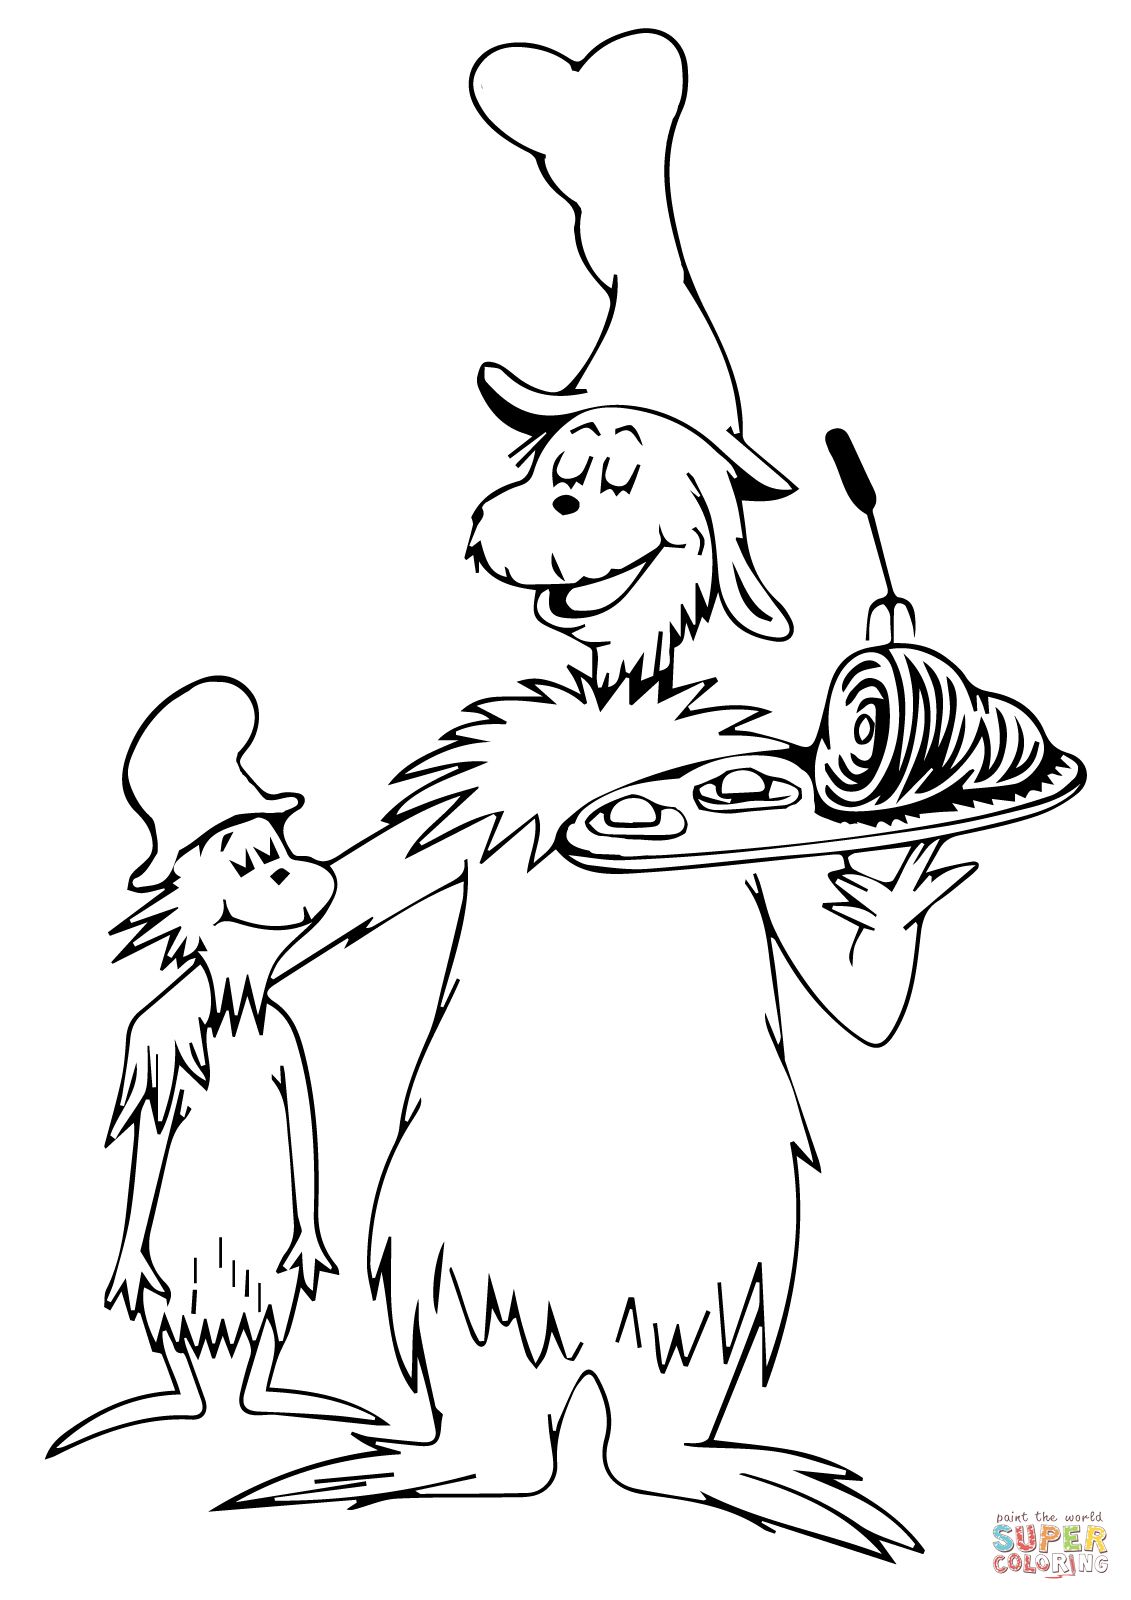 Green eggs and ham coloring page dr seuss coloring sheet dr seuss coloring pag dr seuss prchool